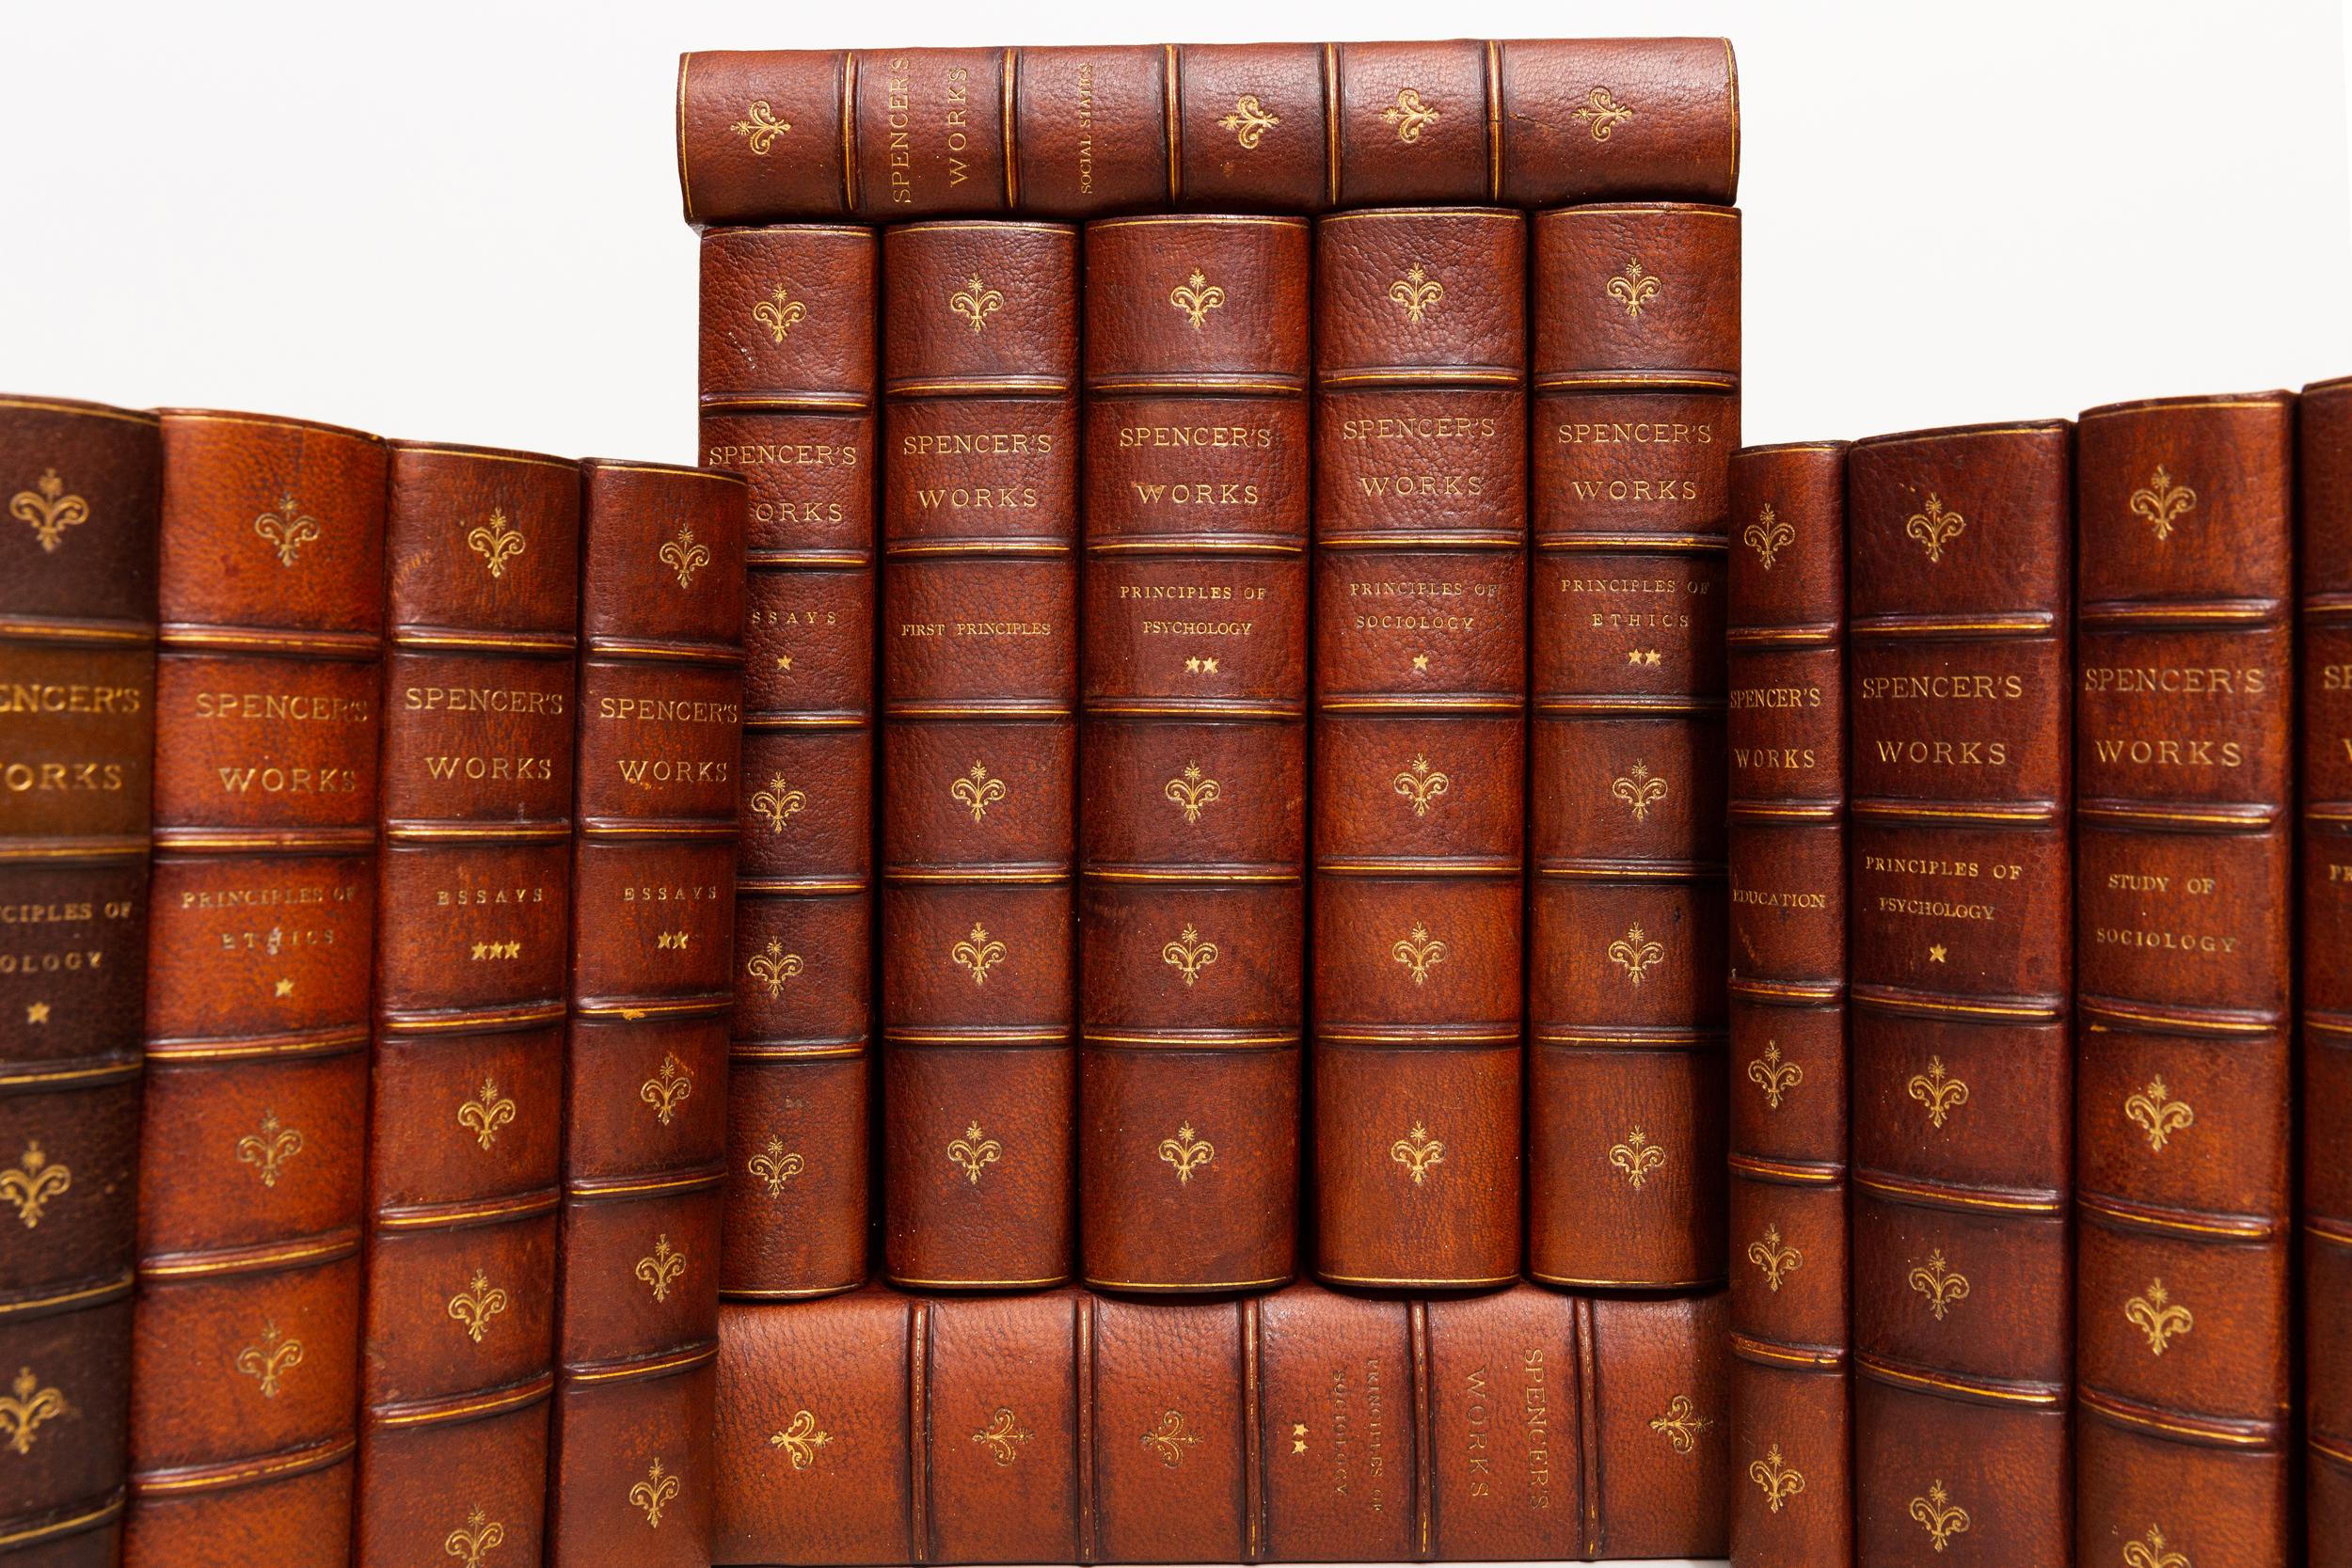 15 Volumes. Herbert Spencer, The Works of Herbert Spencer. Includes The Principles of Sociology, Social Statistics, Principles of Psychology, and more. Bound in 3/4 brown morocco. Marbled boards. Raised bands. Top edges gilt. Marbled endpapers.